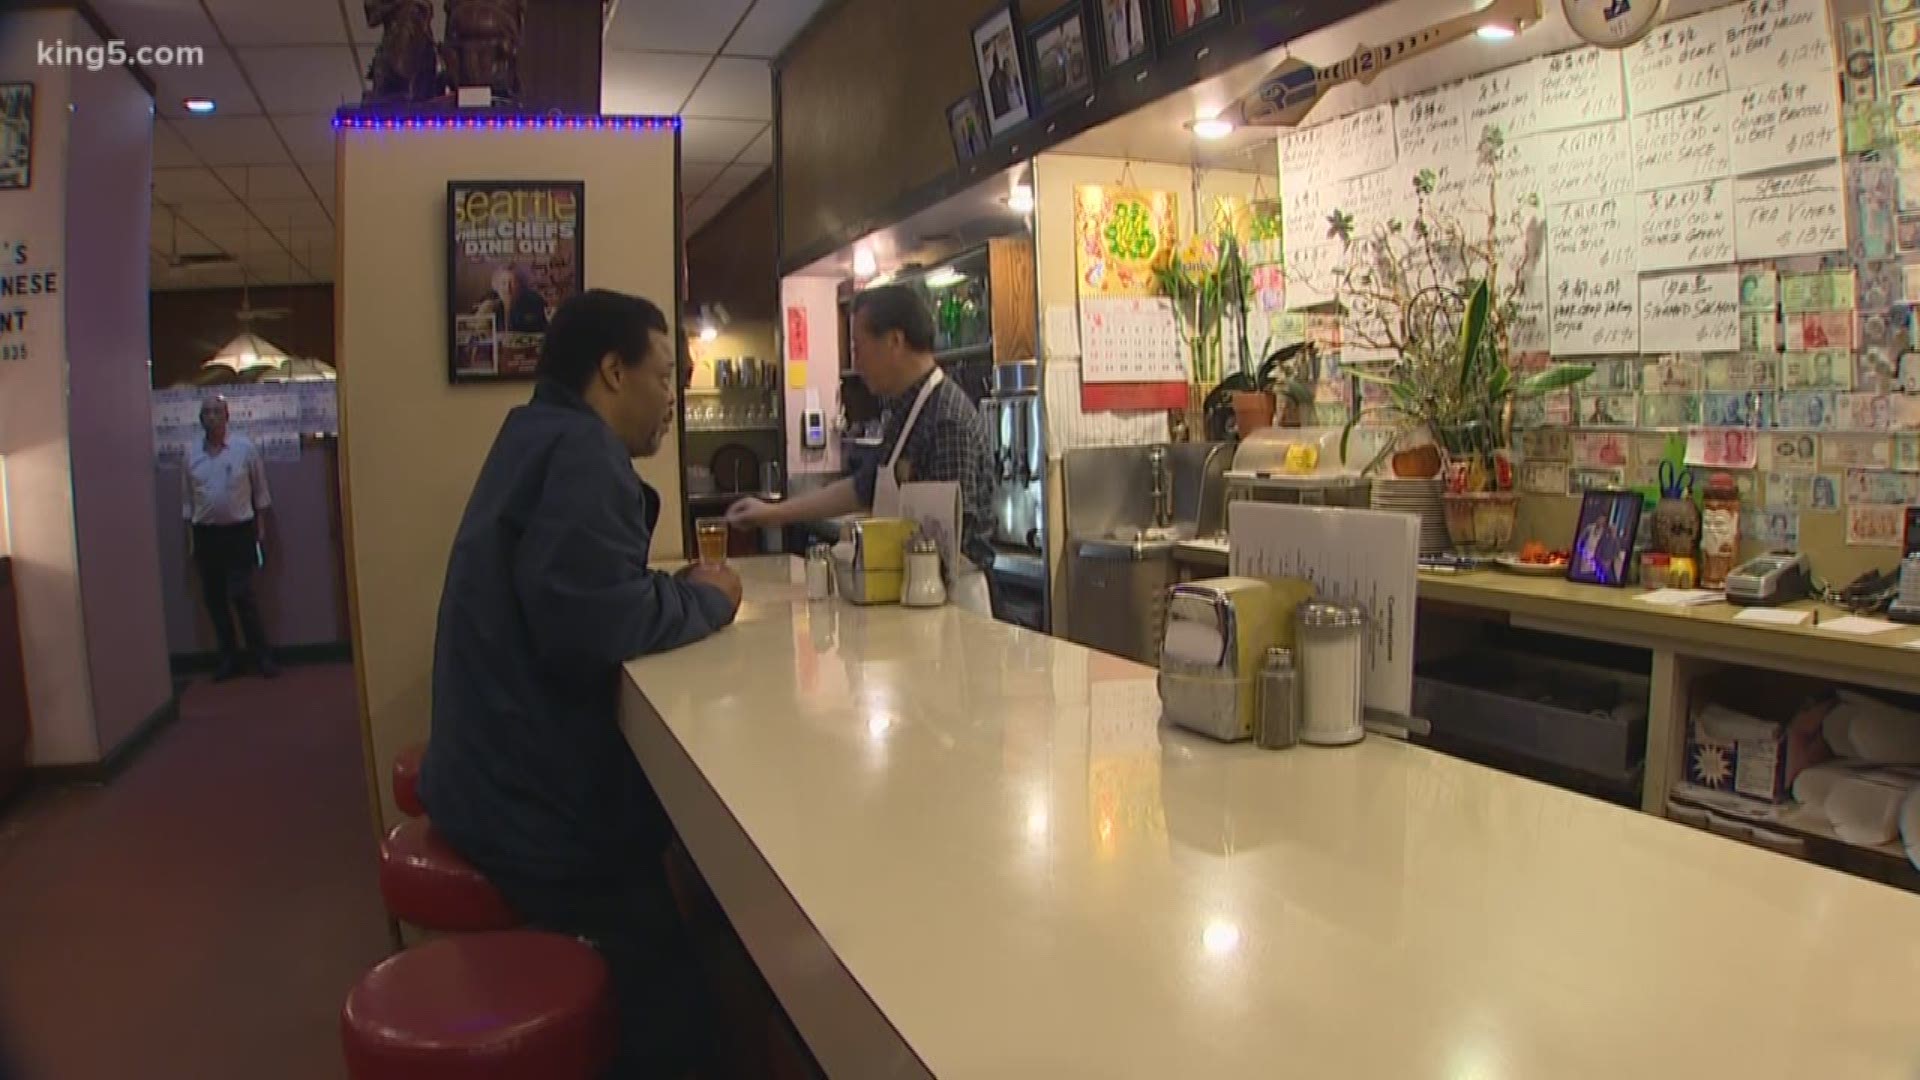 Some business owners in Seattle's International District say news of the coronavirus outbreak has slowed down the flow of customers.